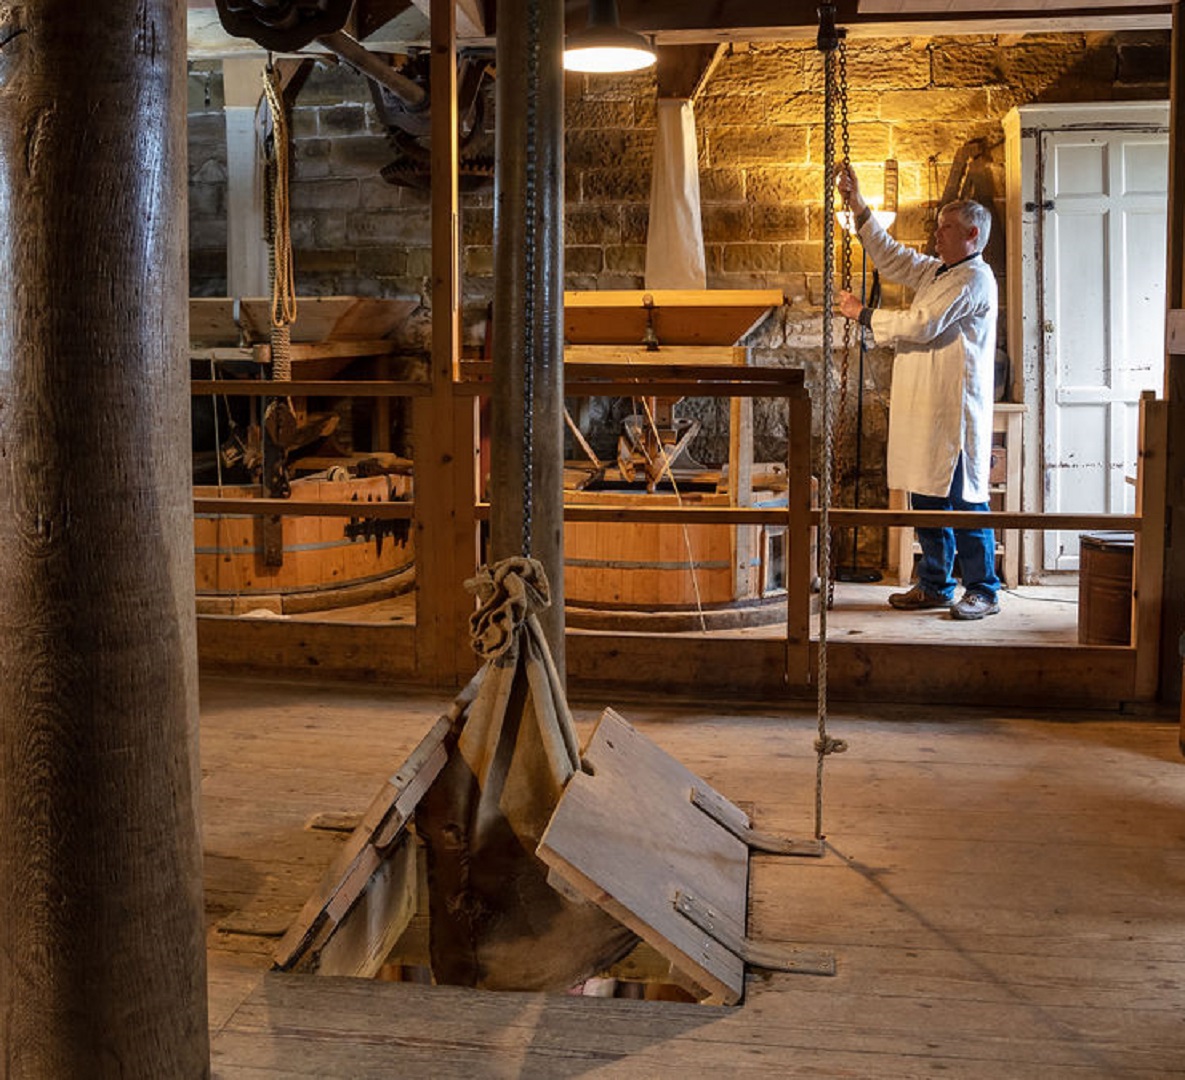 🌾Experience the timeless charm of @NThardwick Stainsby Mill during National Mills Weekend! 📆11 - 12 May Step into history this weekend with FREE entry to the enchanting Victorian watermill ⬇ shorturl.at/bgpI2 📷National Trust/Jon Scrimshaw #DerbyUK #Mill #FreeEntry